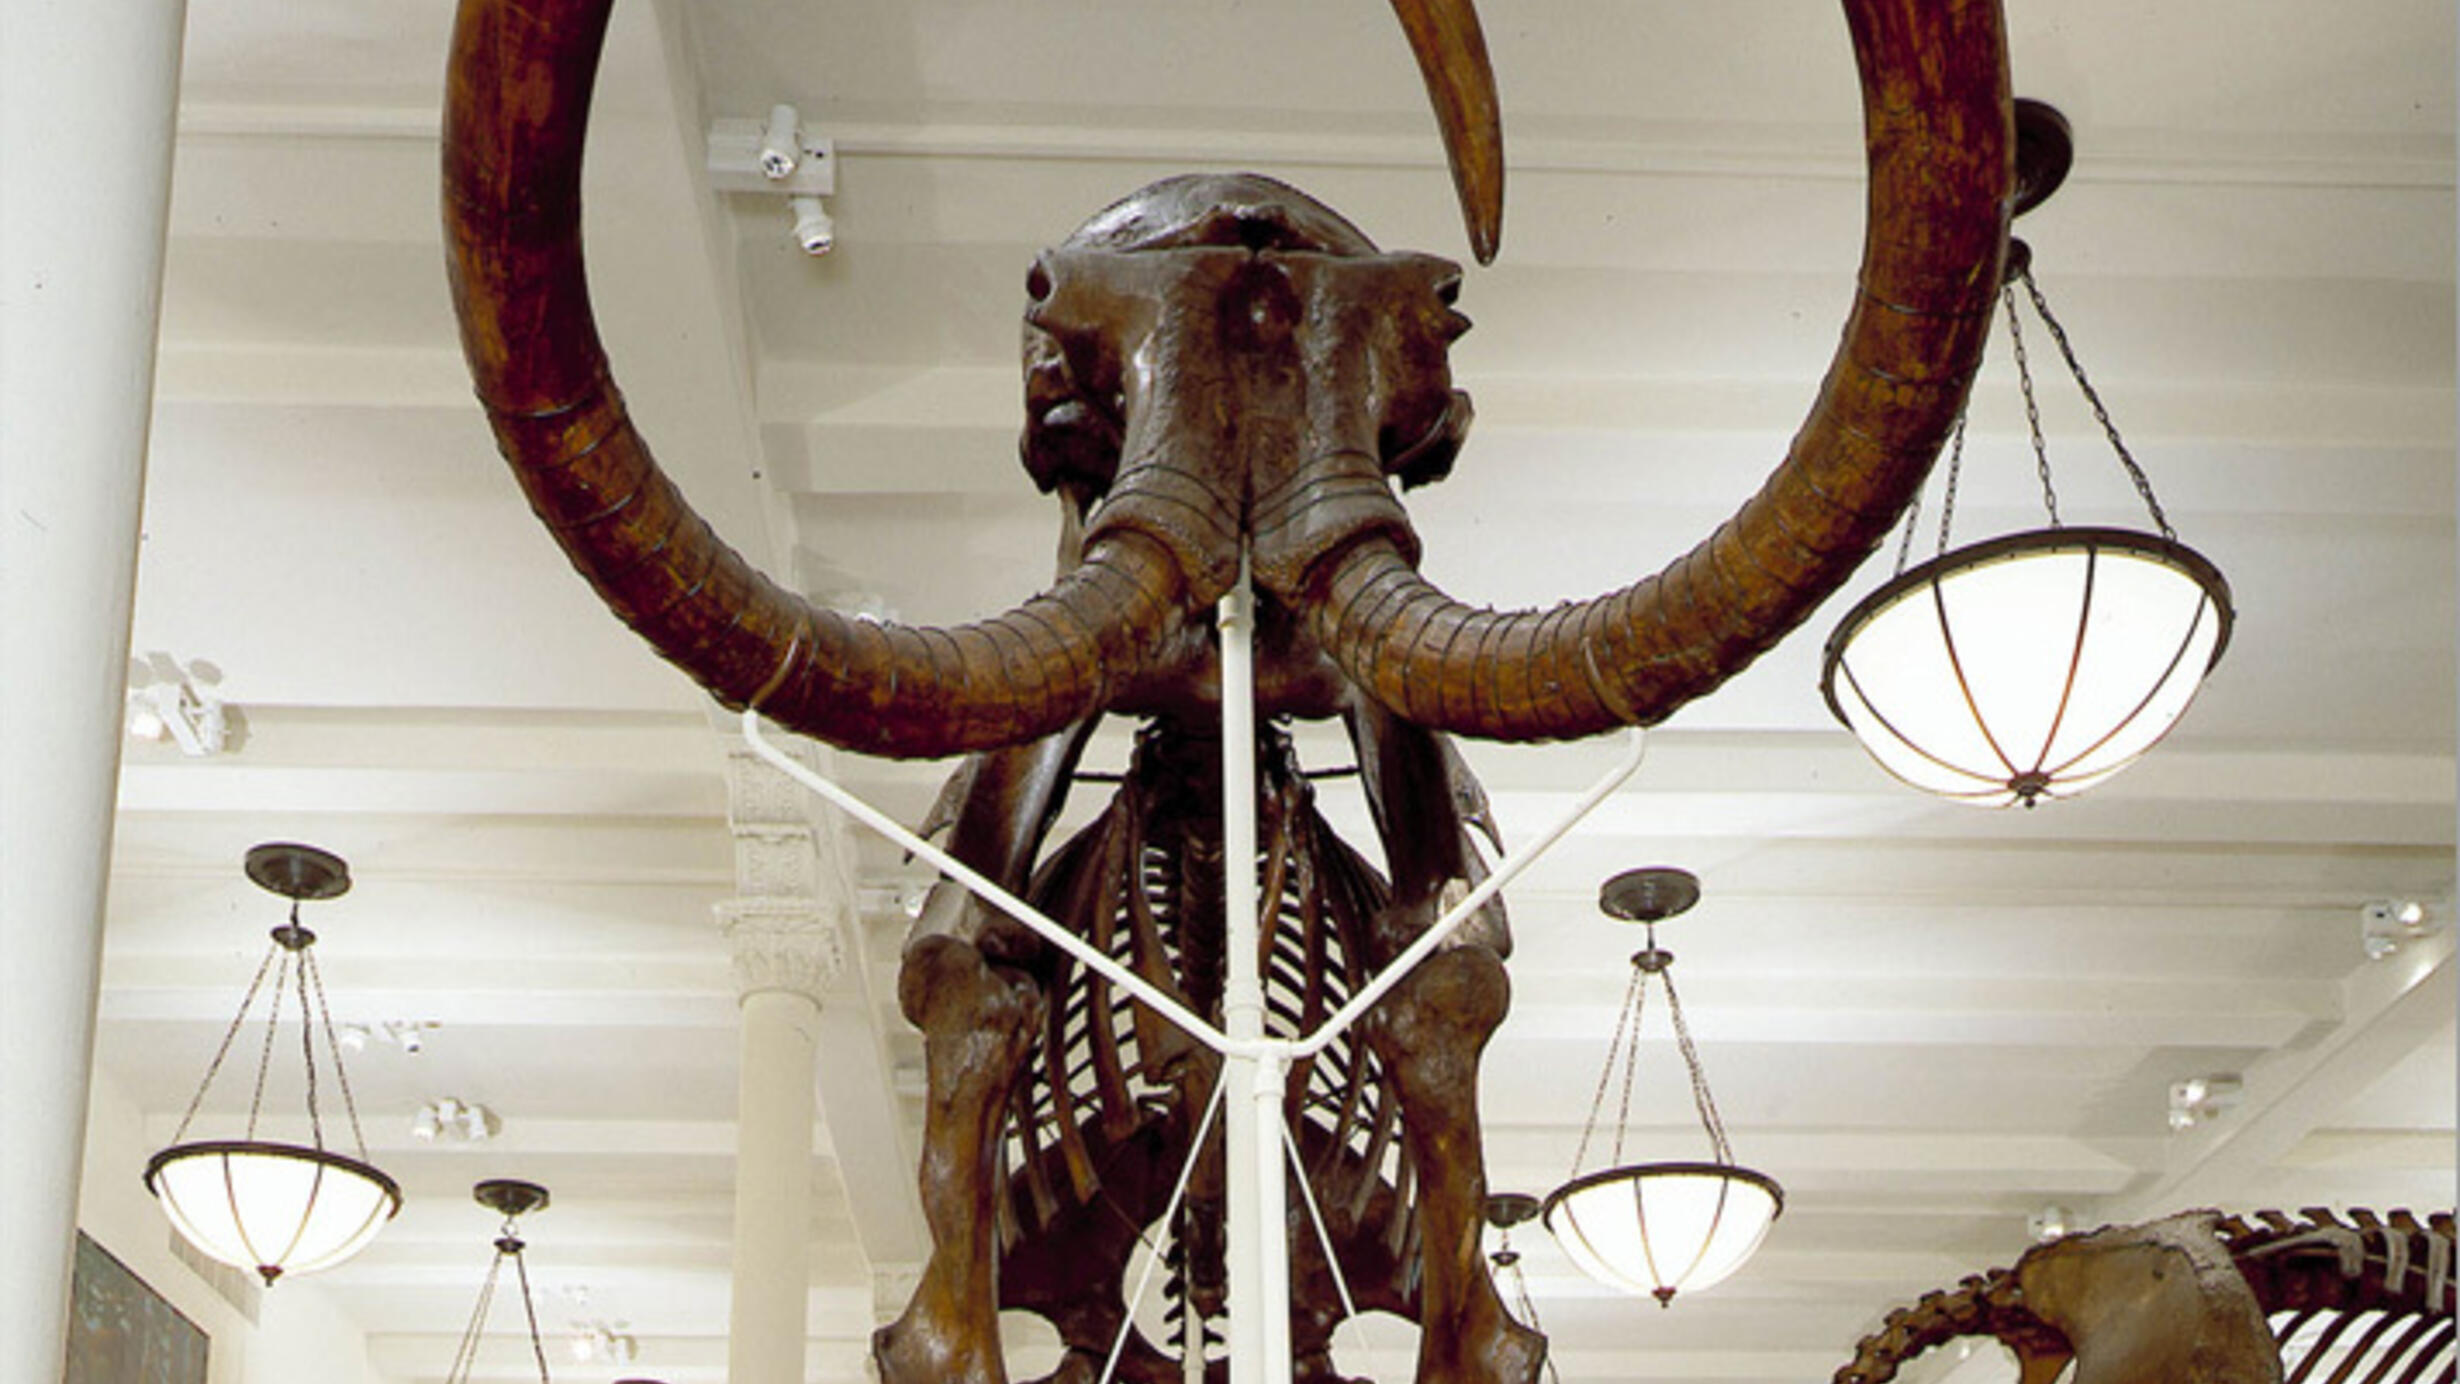 Front view of the Museum's mammoth fossil focusing on the creature's massive curved tusks.